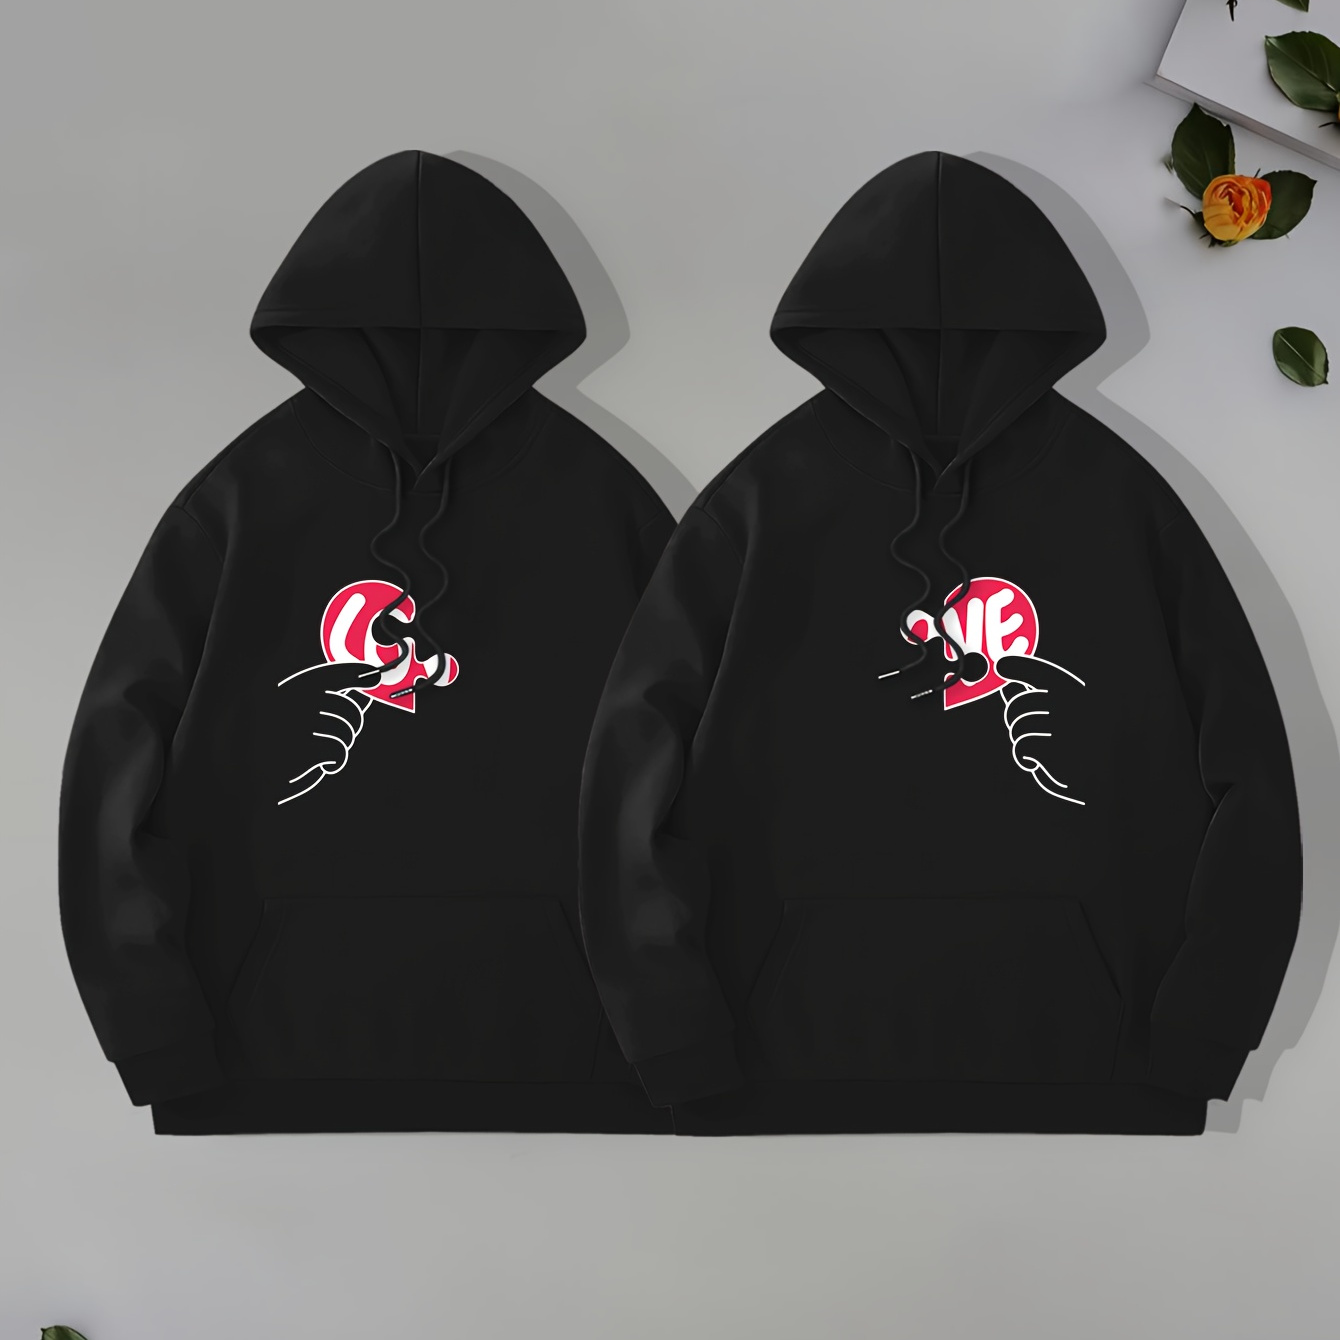 

Hearts Print Lover's Pullover Round Neck Hoodies With Kangaroo Pocket Long Sleeve Hooded Sweatshirt Loose Casual Top For Autumn Winter Men's Clothing As Gifts